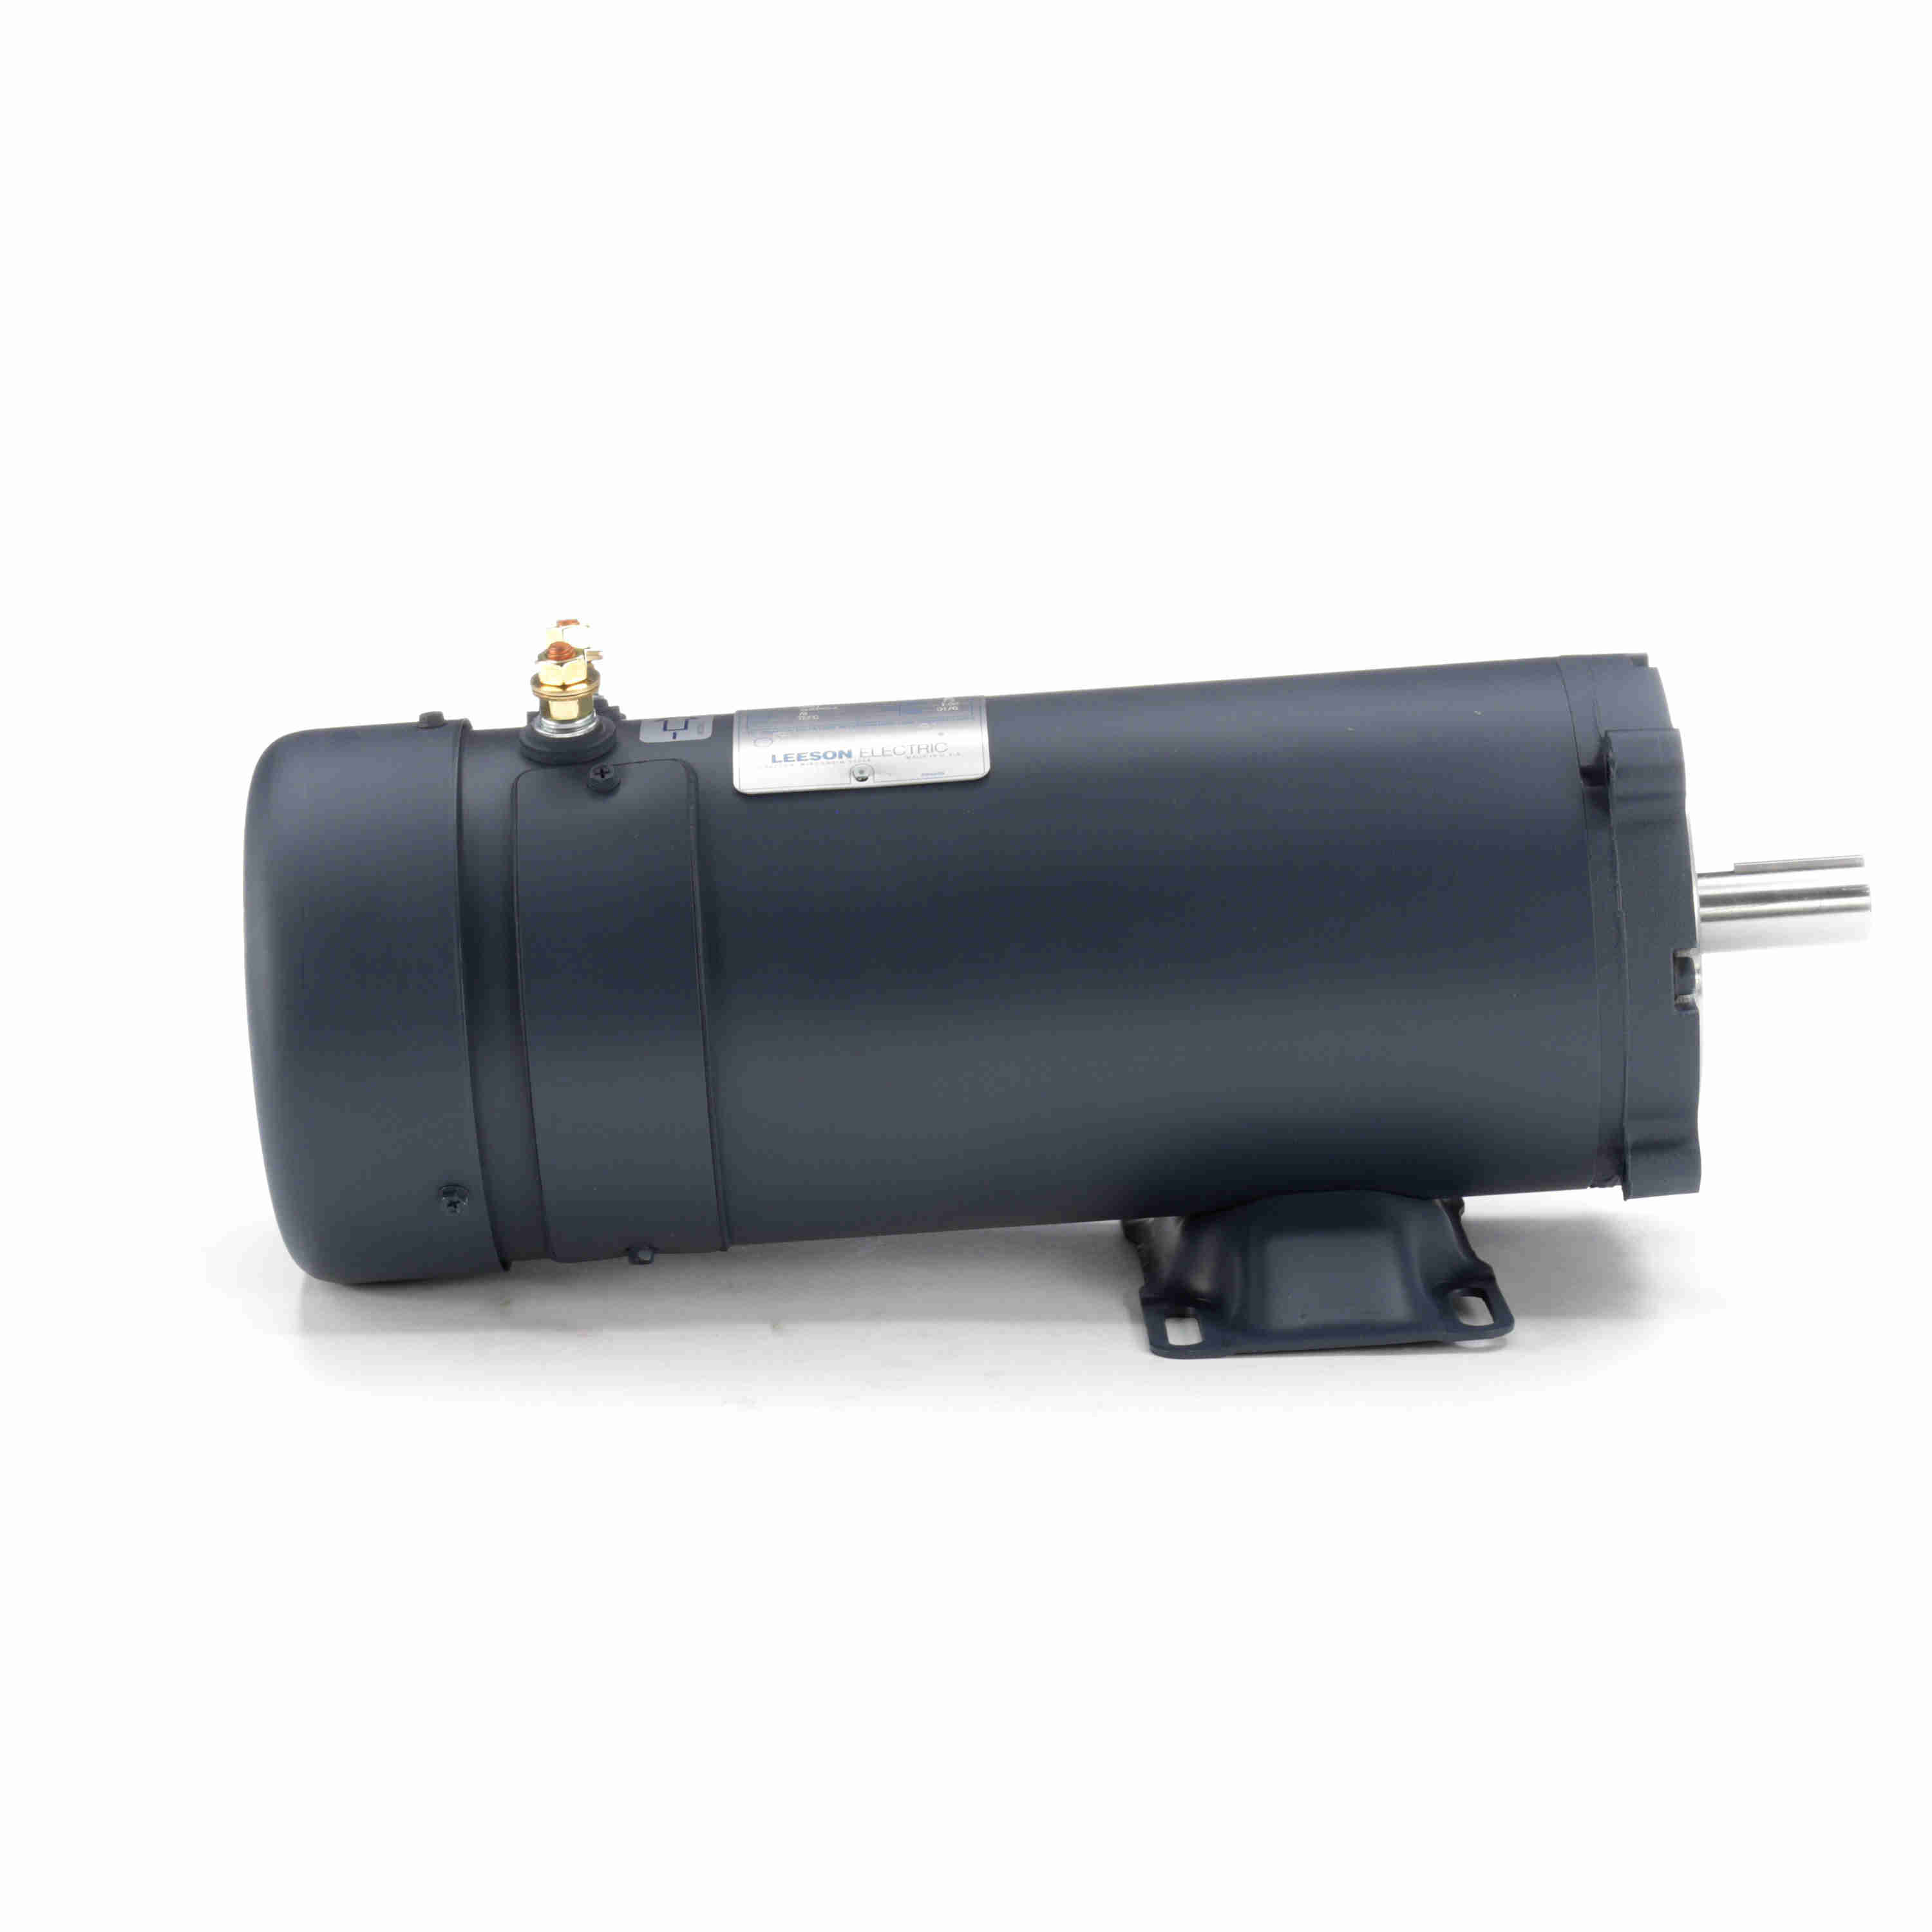 109106.00 Leeson 2HP Low Voltage DC Electric Motor, 1800RPM 3